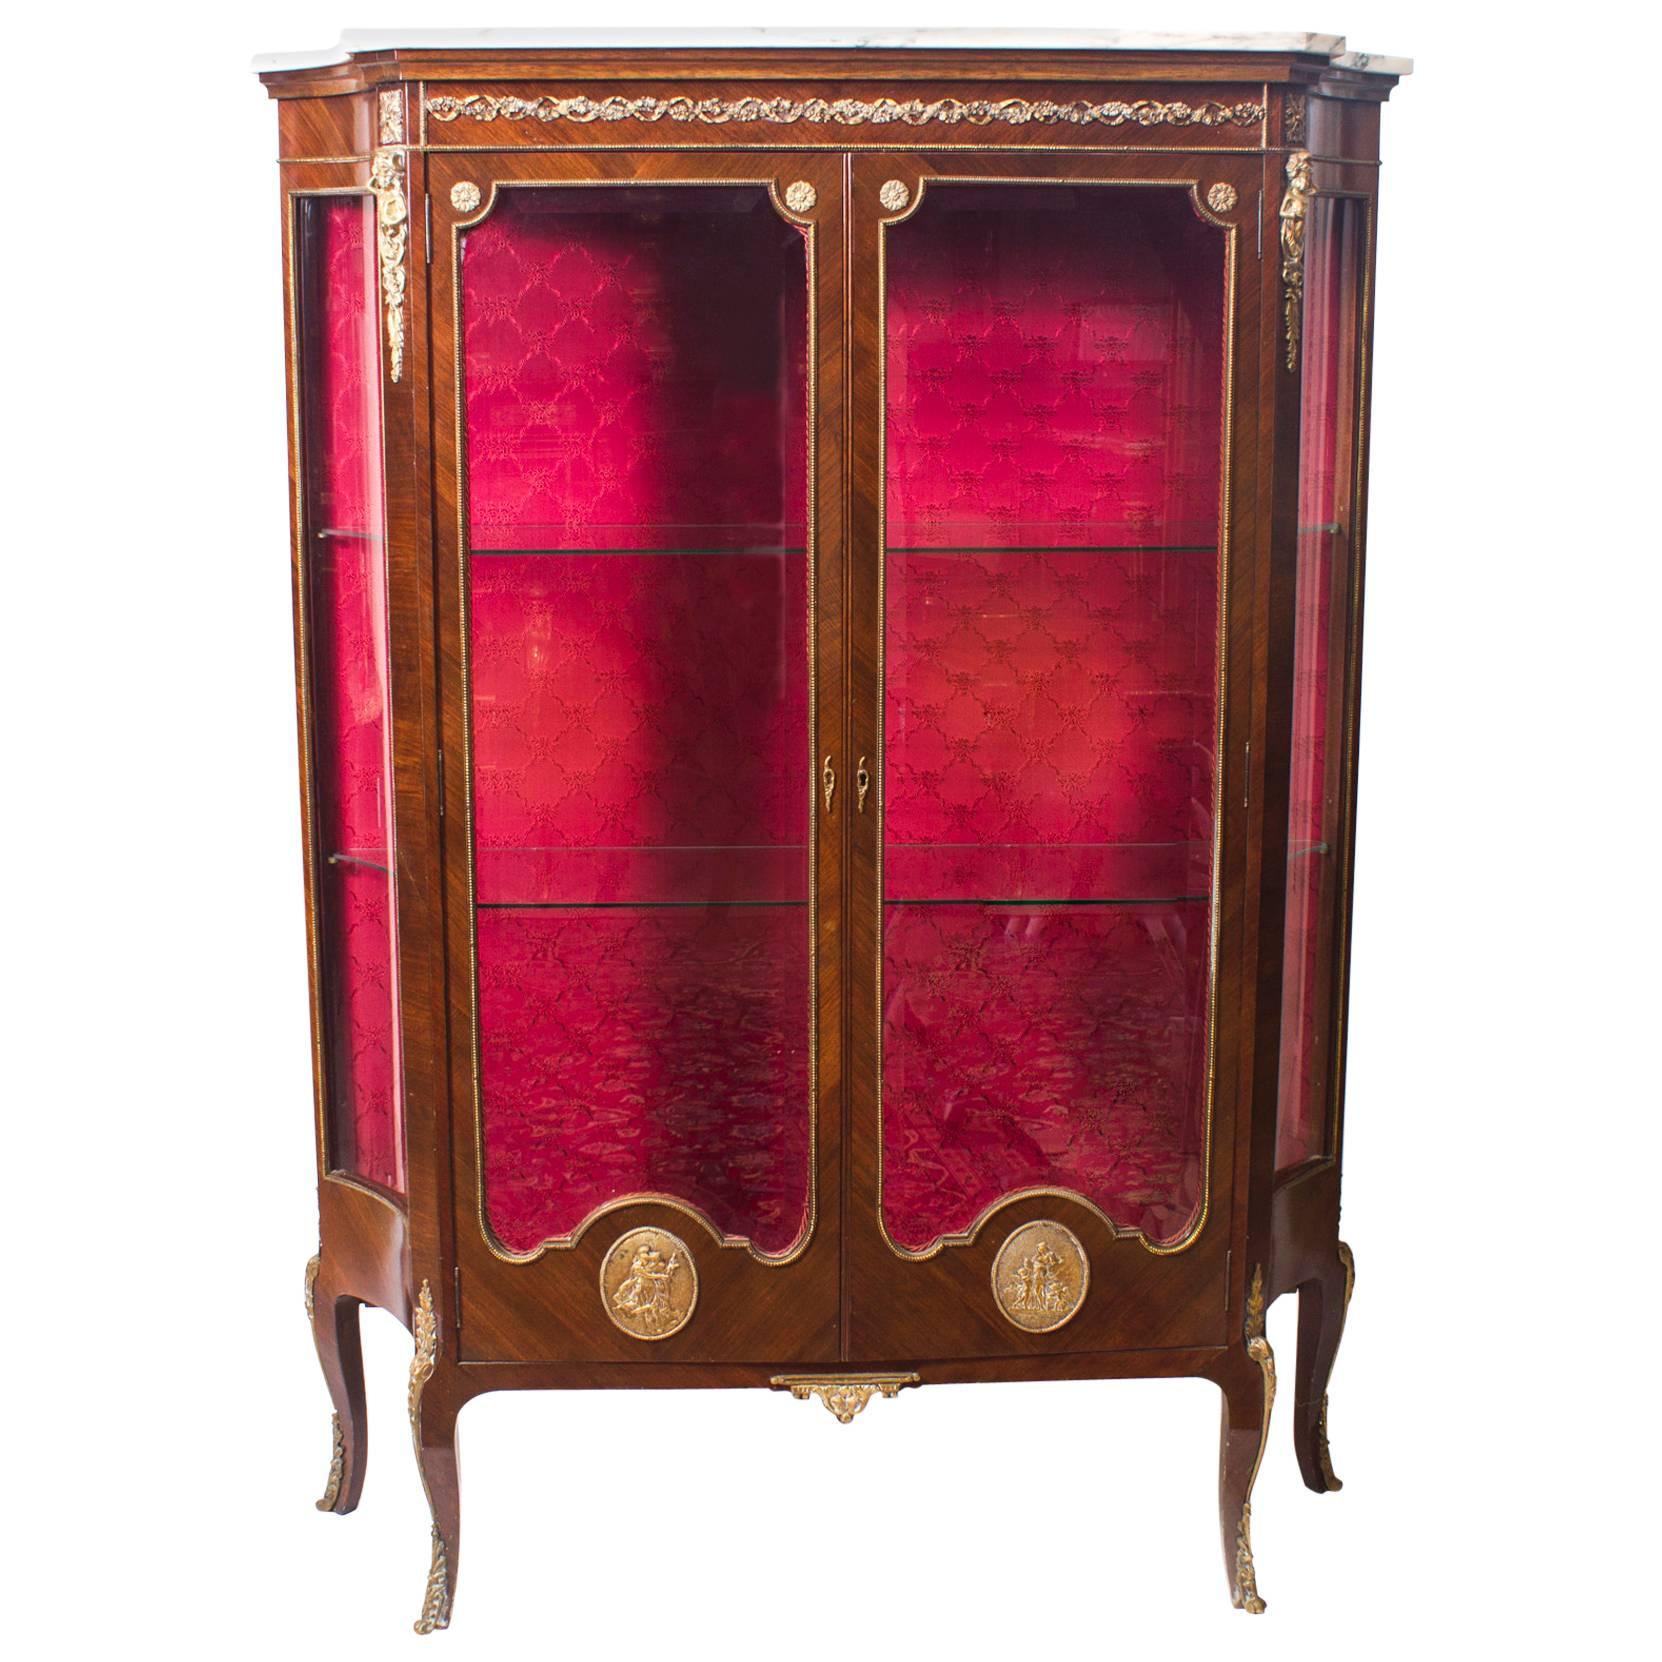 Early 20th Century French Kingwood Marble-Top Vitrine Cabinet